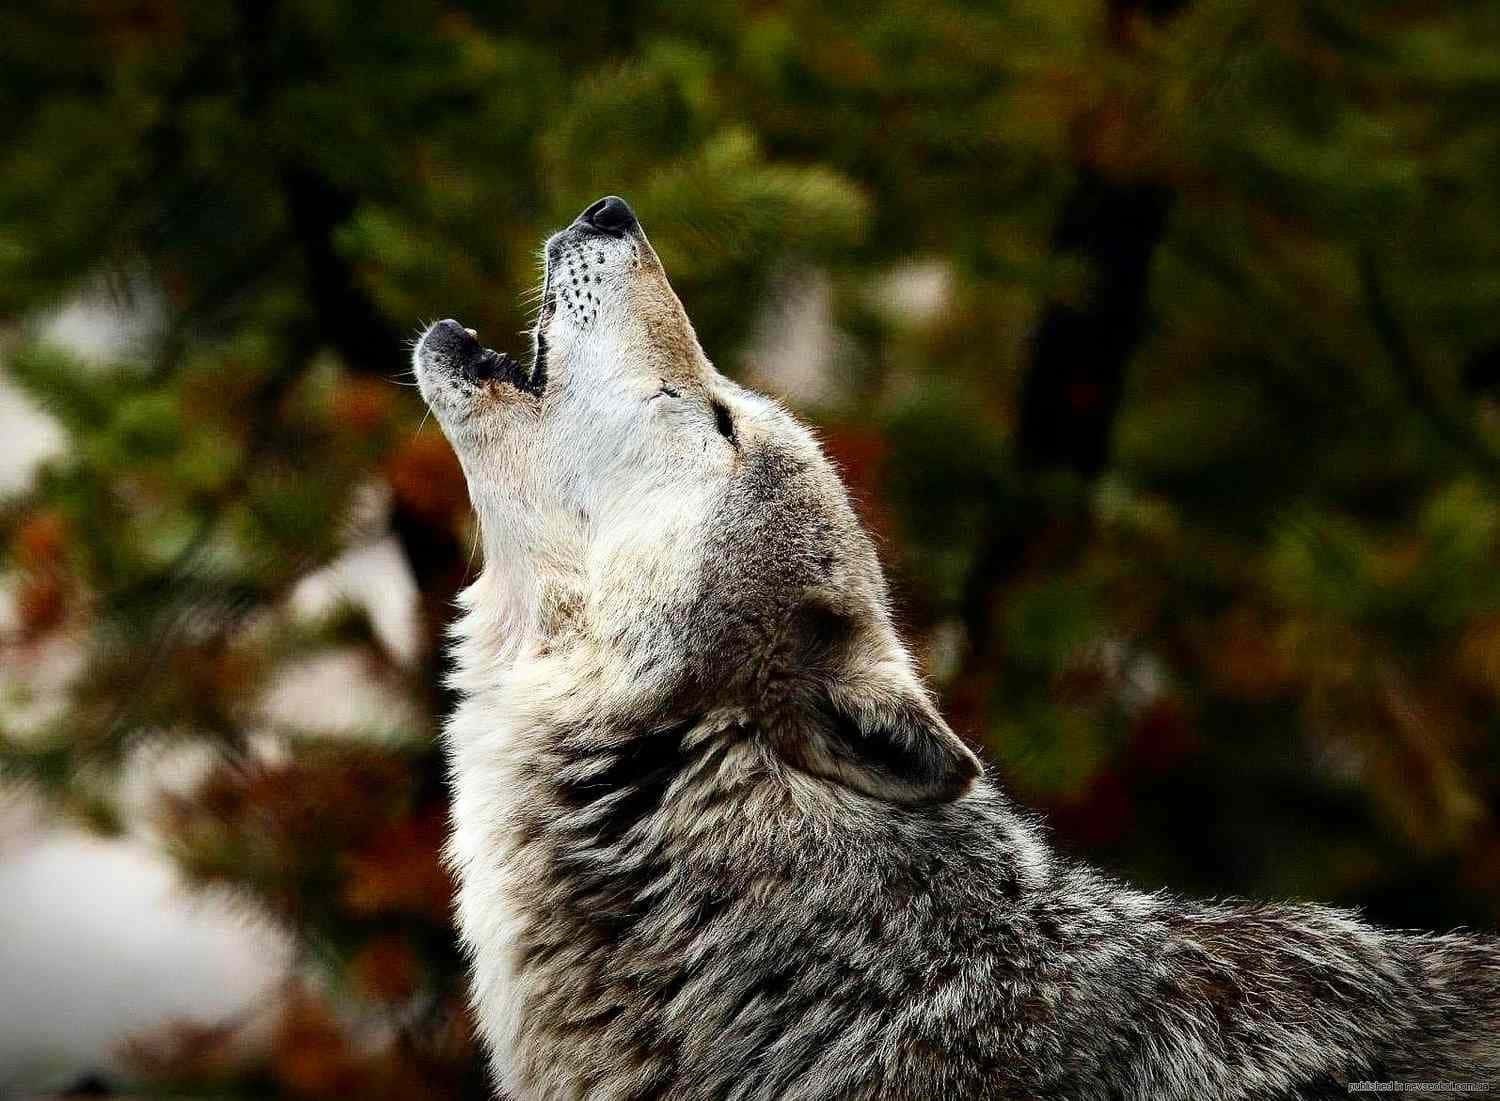 “Witness The Majestic Presence Of A Wolf”